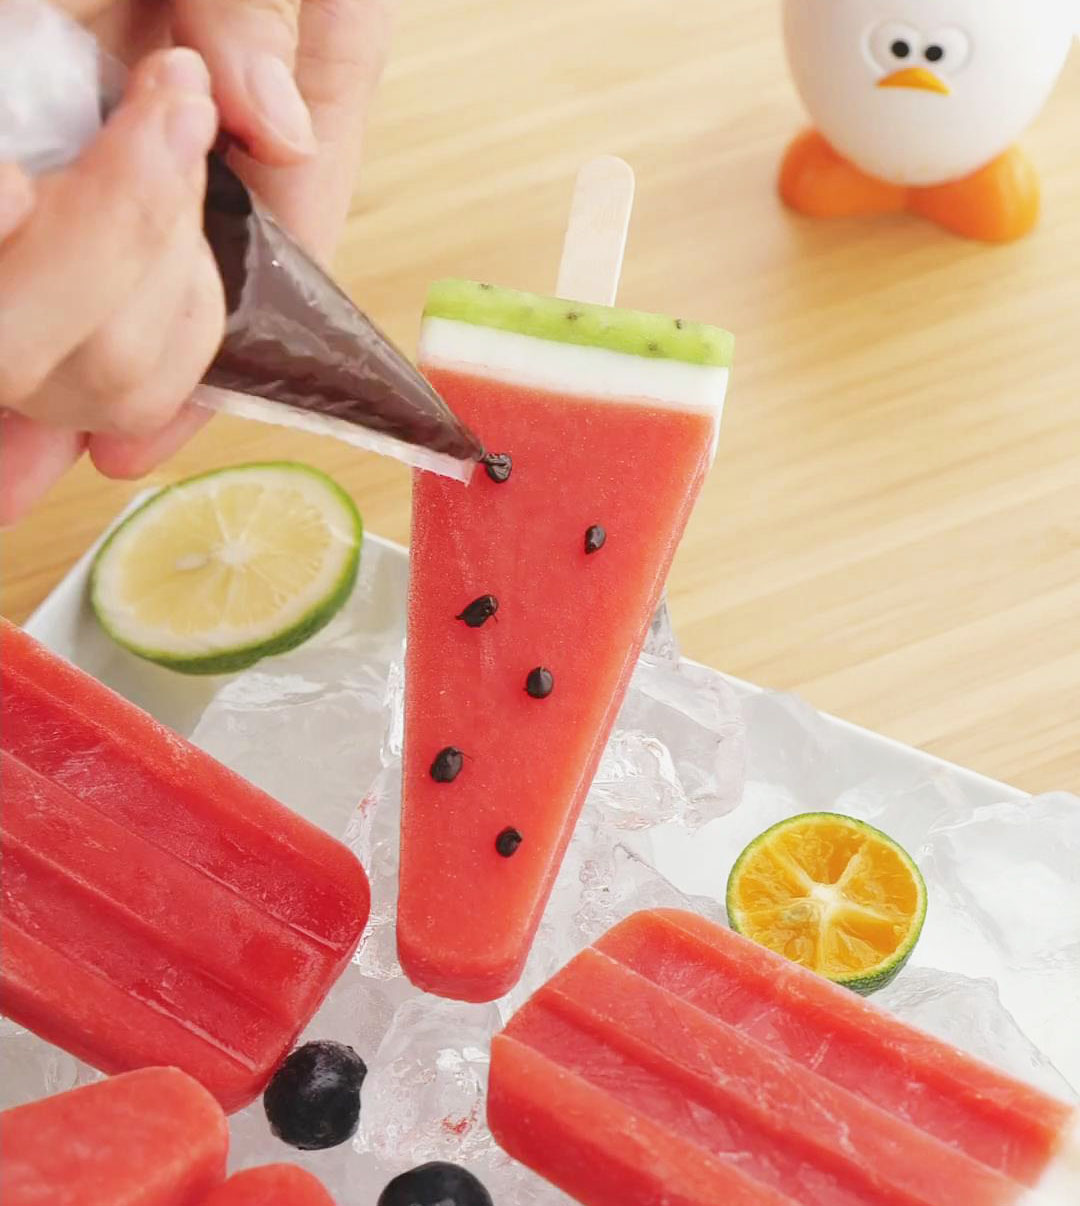 Decorate the watermelon popsicles with dots of chocolate to create the seeds